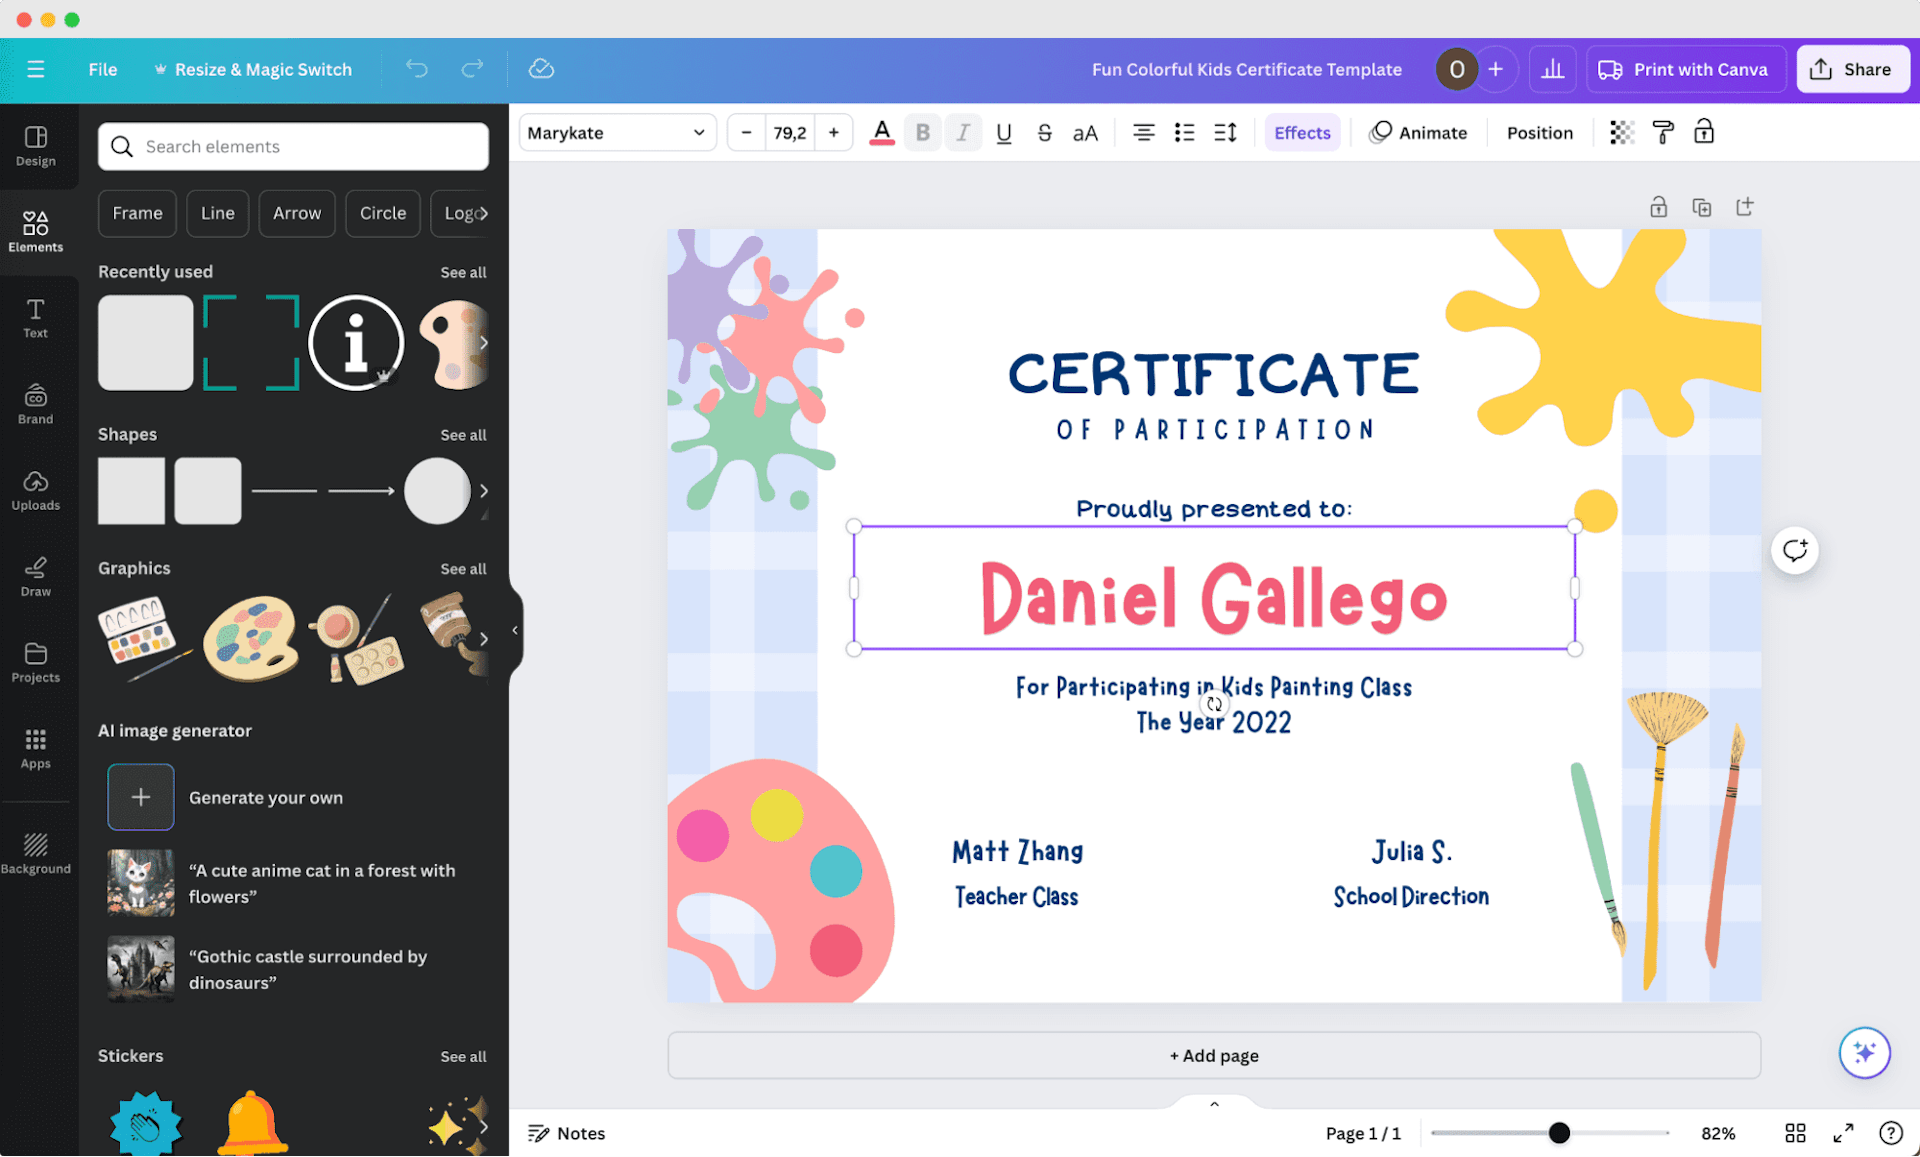 Redirecting the user from Canva GPT to Canva tool to customize the AI certificate design.